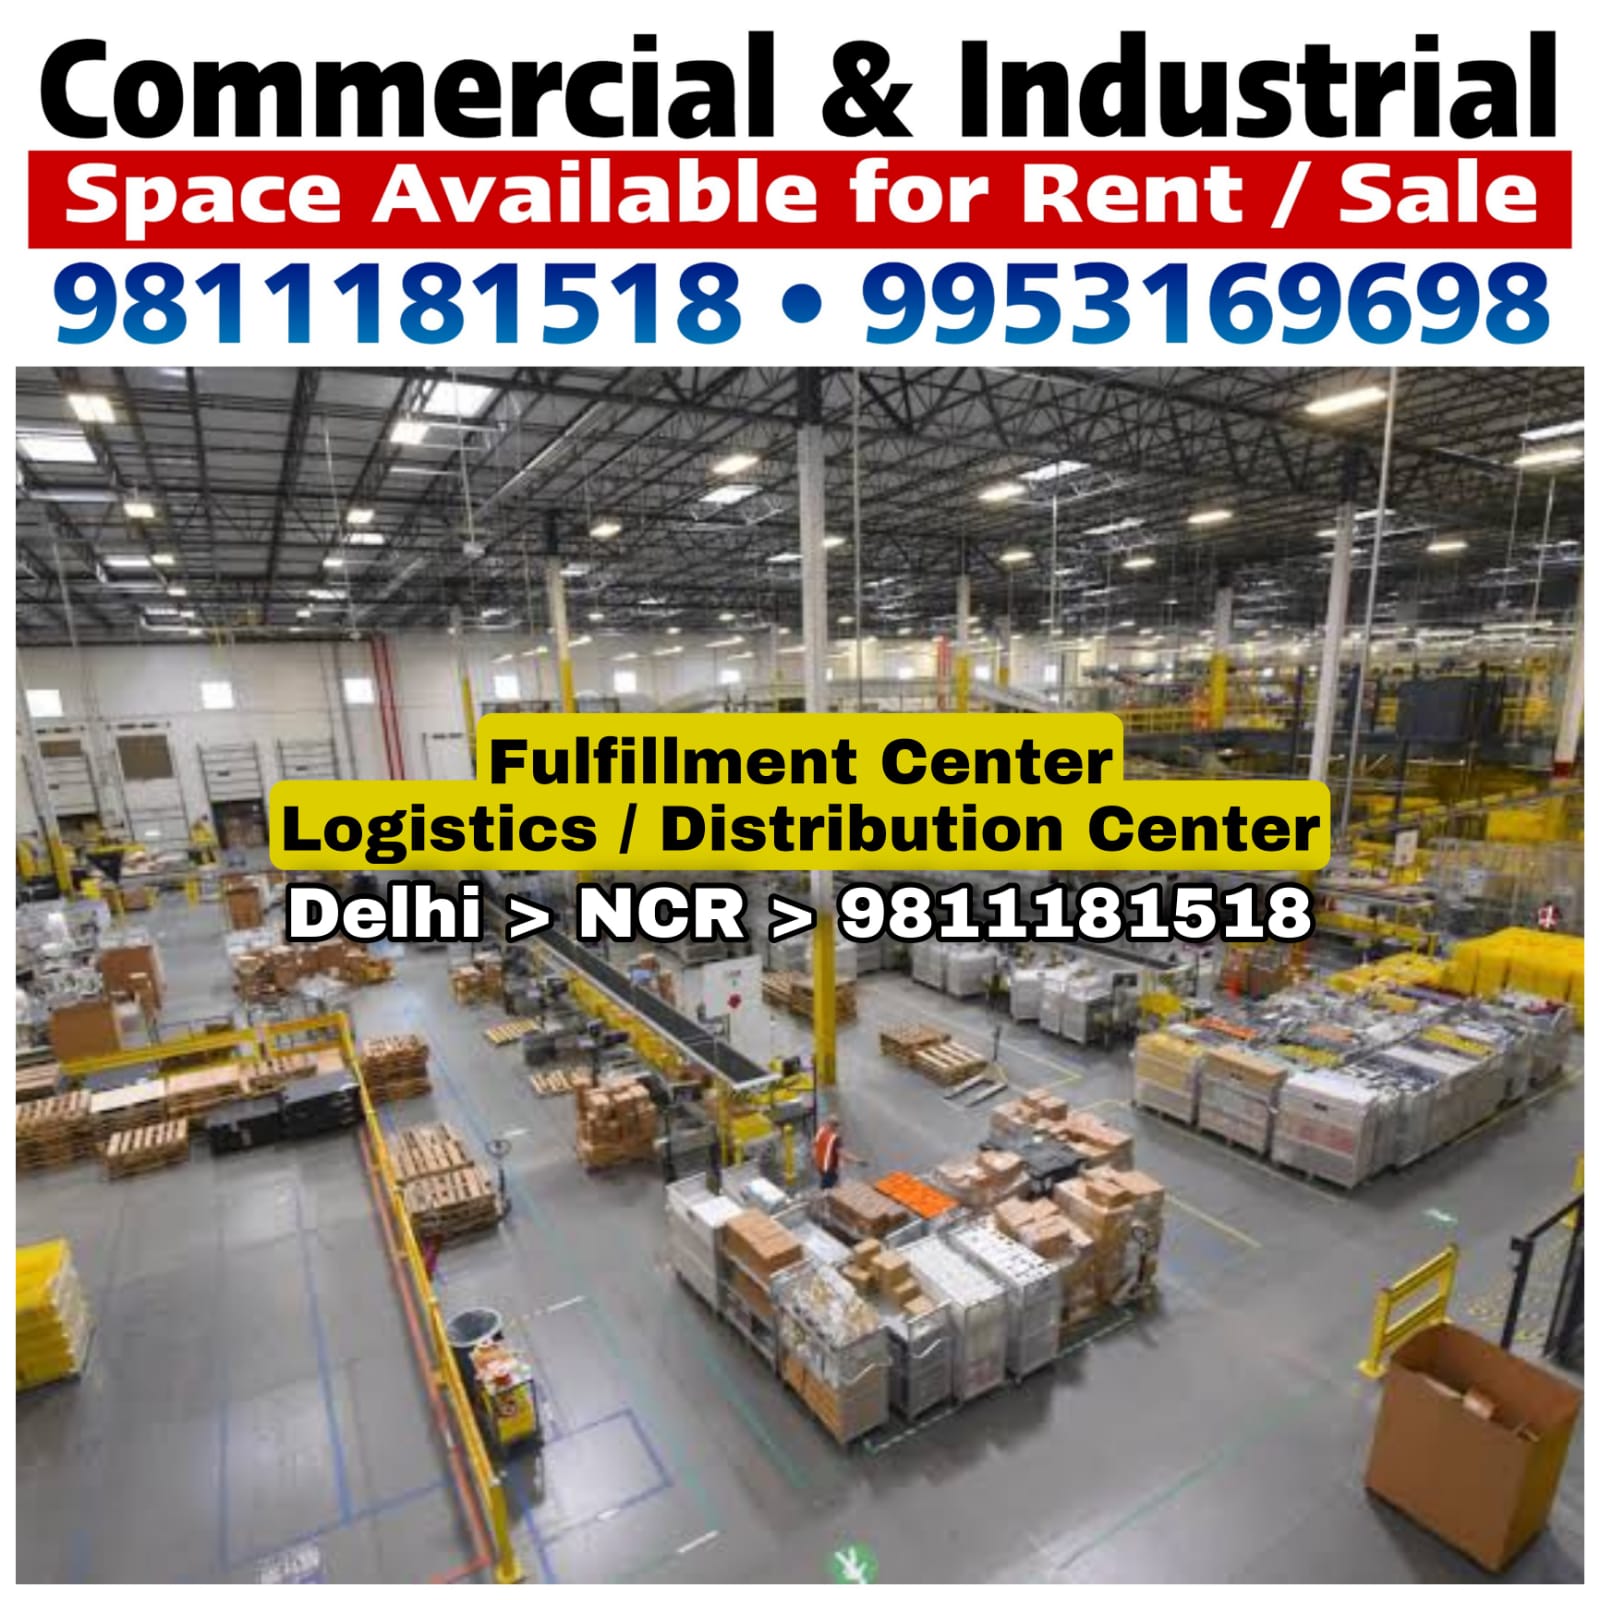 Commercial & Industrial Space for Rent / Lease / Sale in Kirti Naga